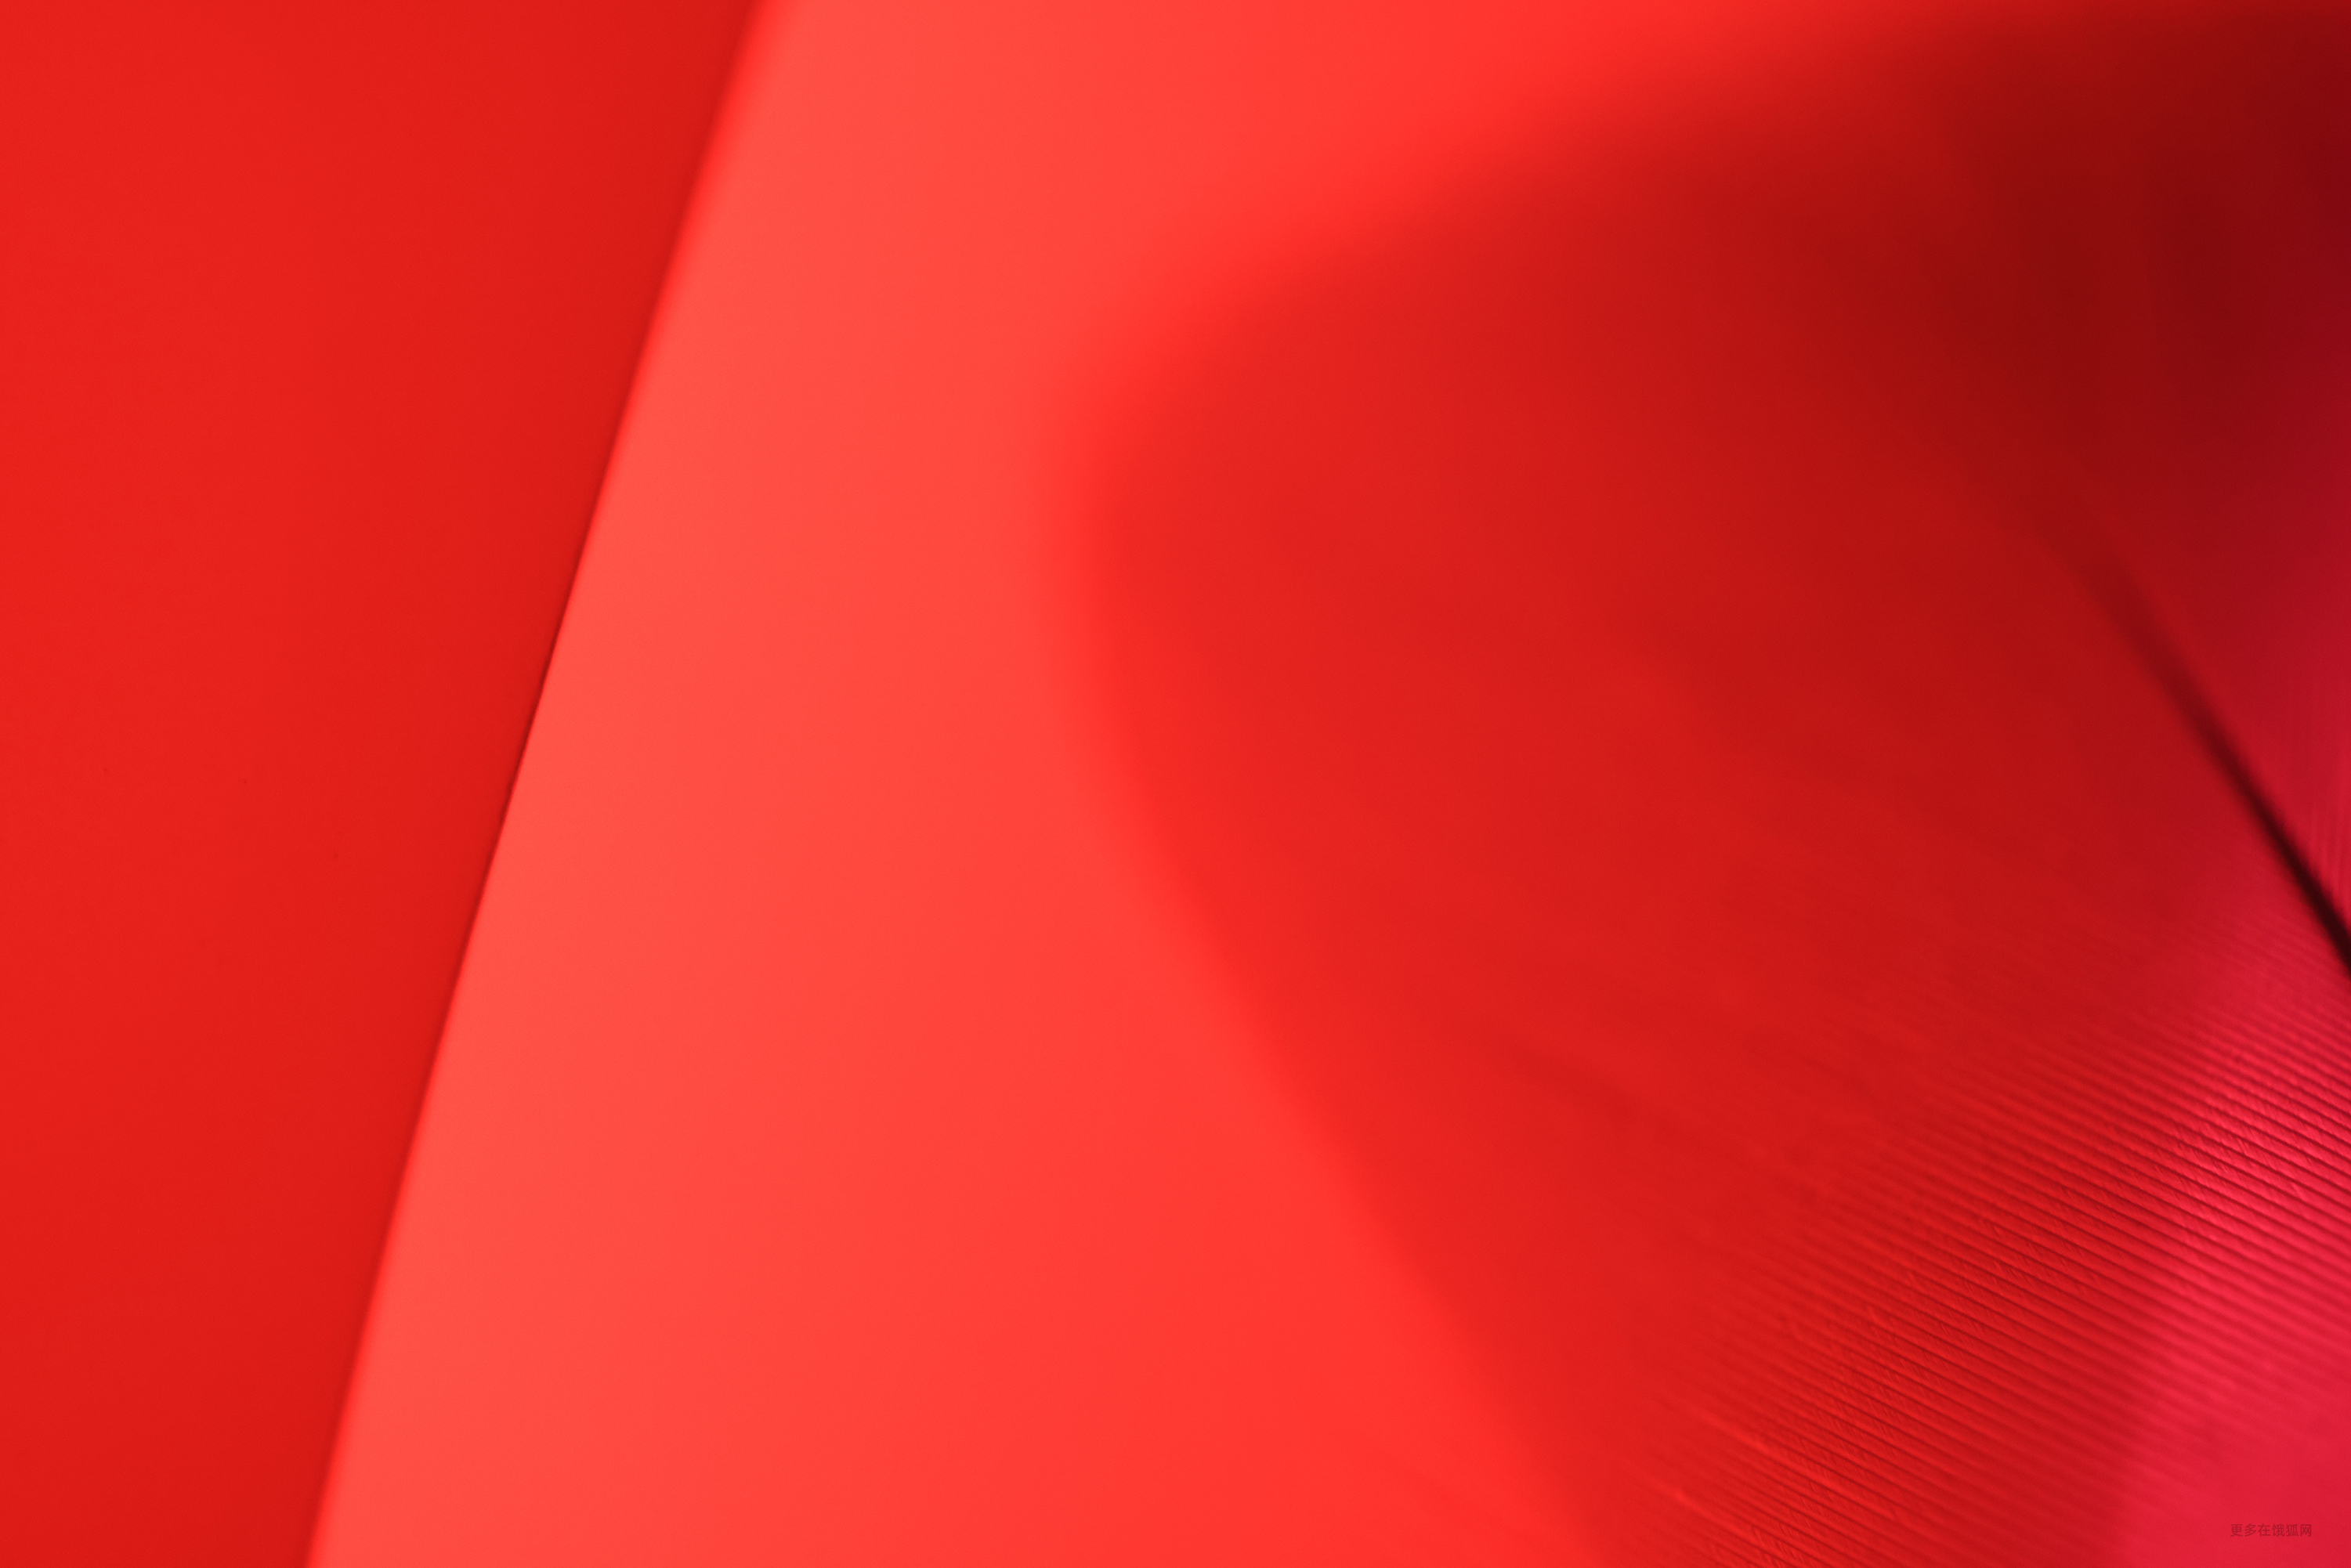 General 3001x2002 red background abstract feathers minimalism